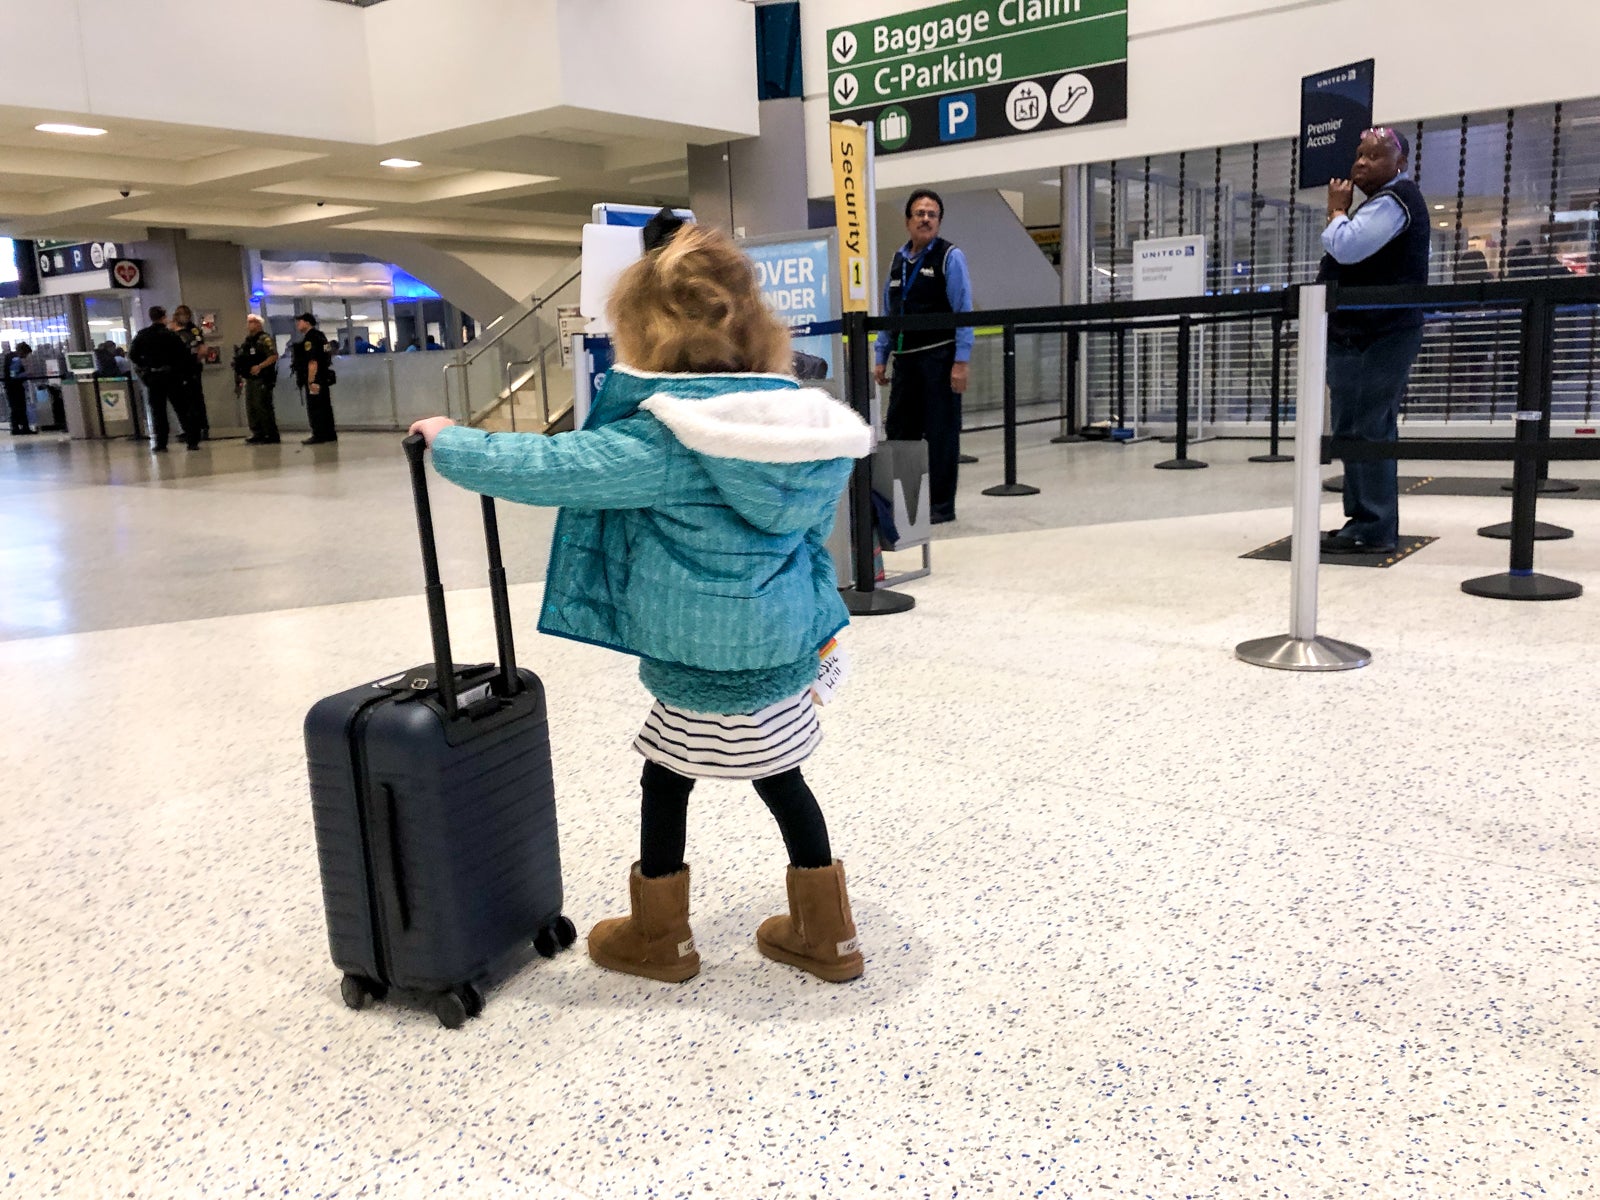 Away Travel Luggage: The Best Suitcases For Family Travel - Bon Voyage With  Kids